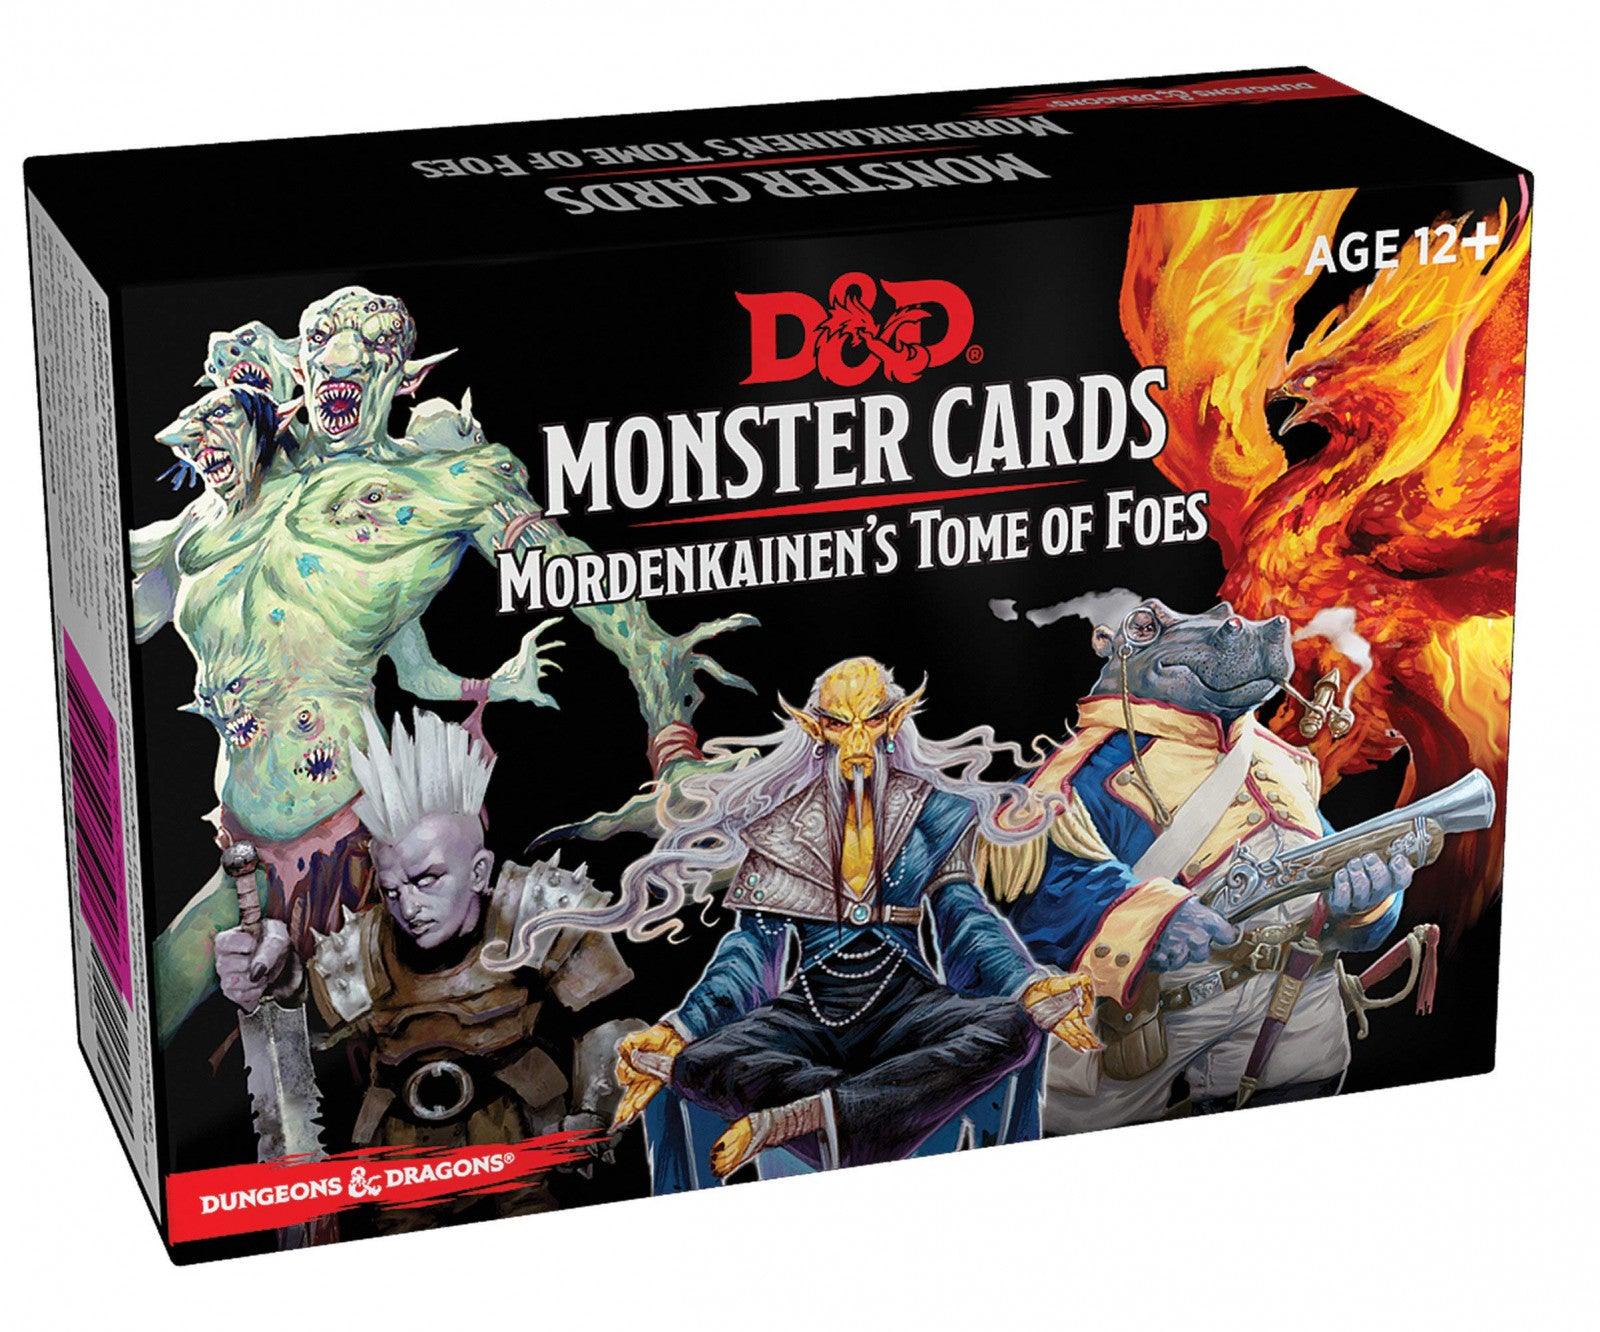 VR-101236 D&D Dungeons & Dragons Spellbook Cards Monster Cards Mordenkainens Tome of Foes - Wizards of the Coast - Titan Pop Culture